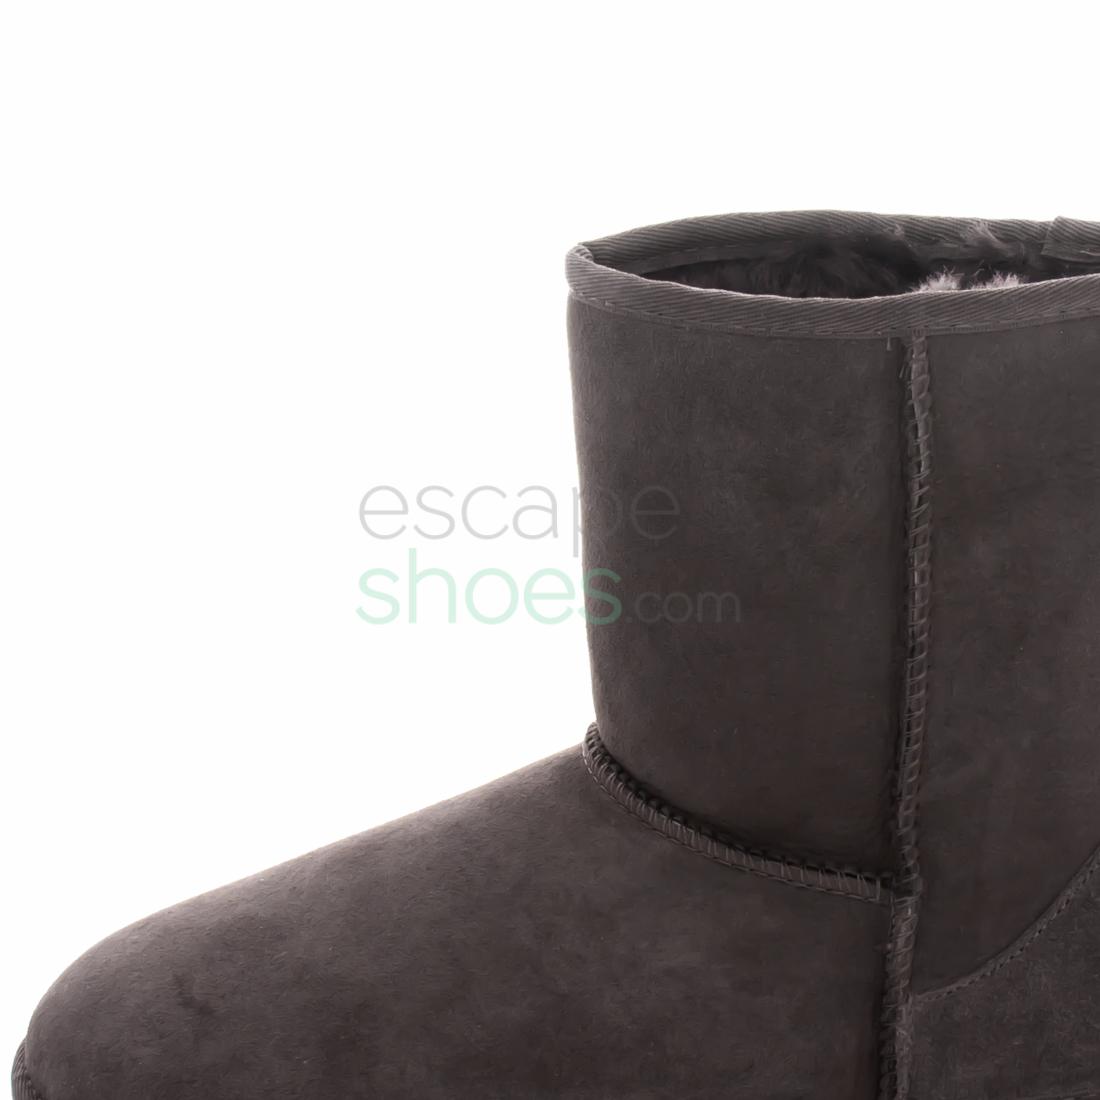 Boots UGG Classic Chocolate 5251Y CHO